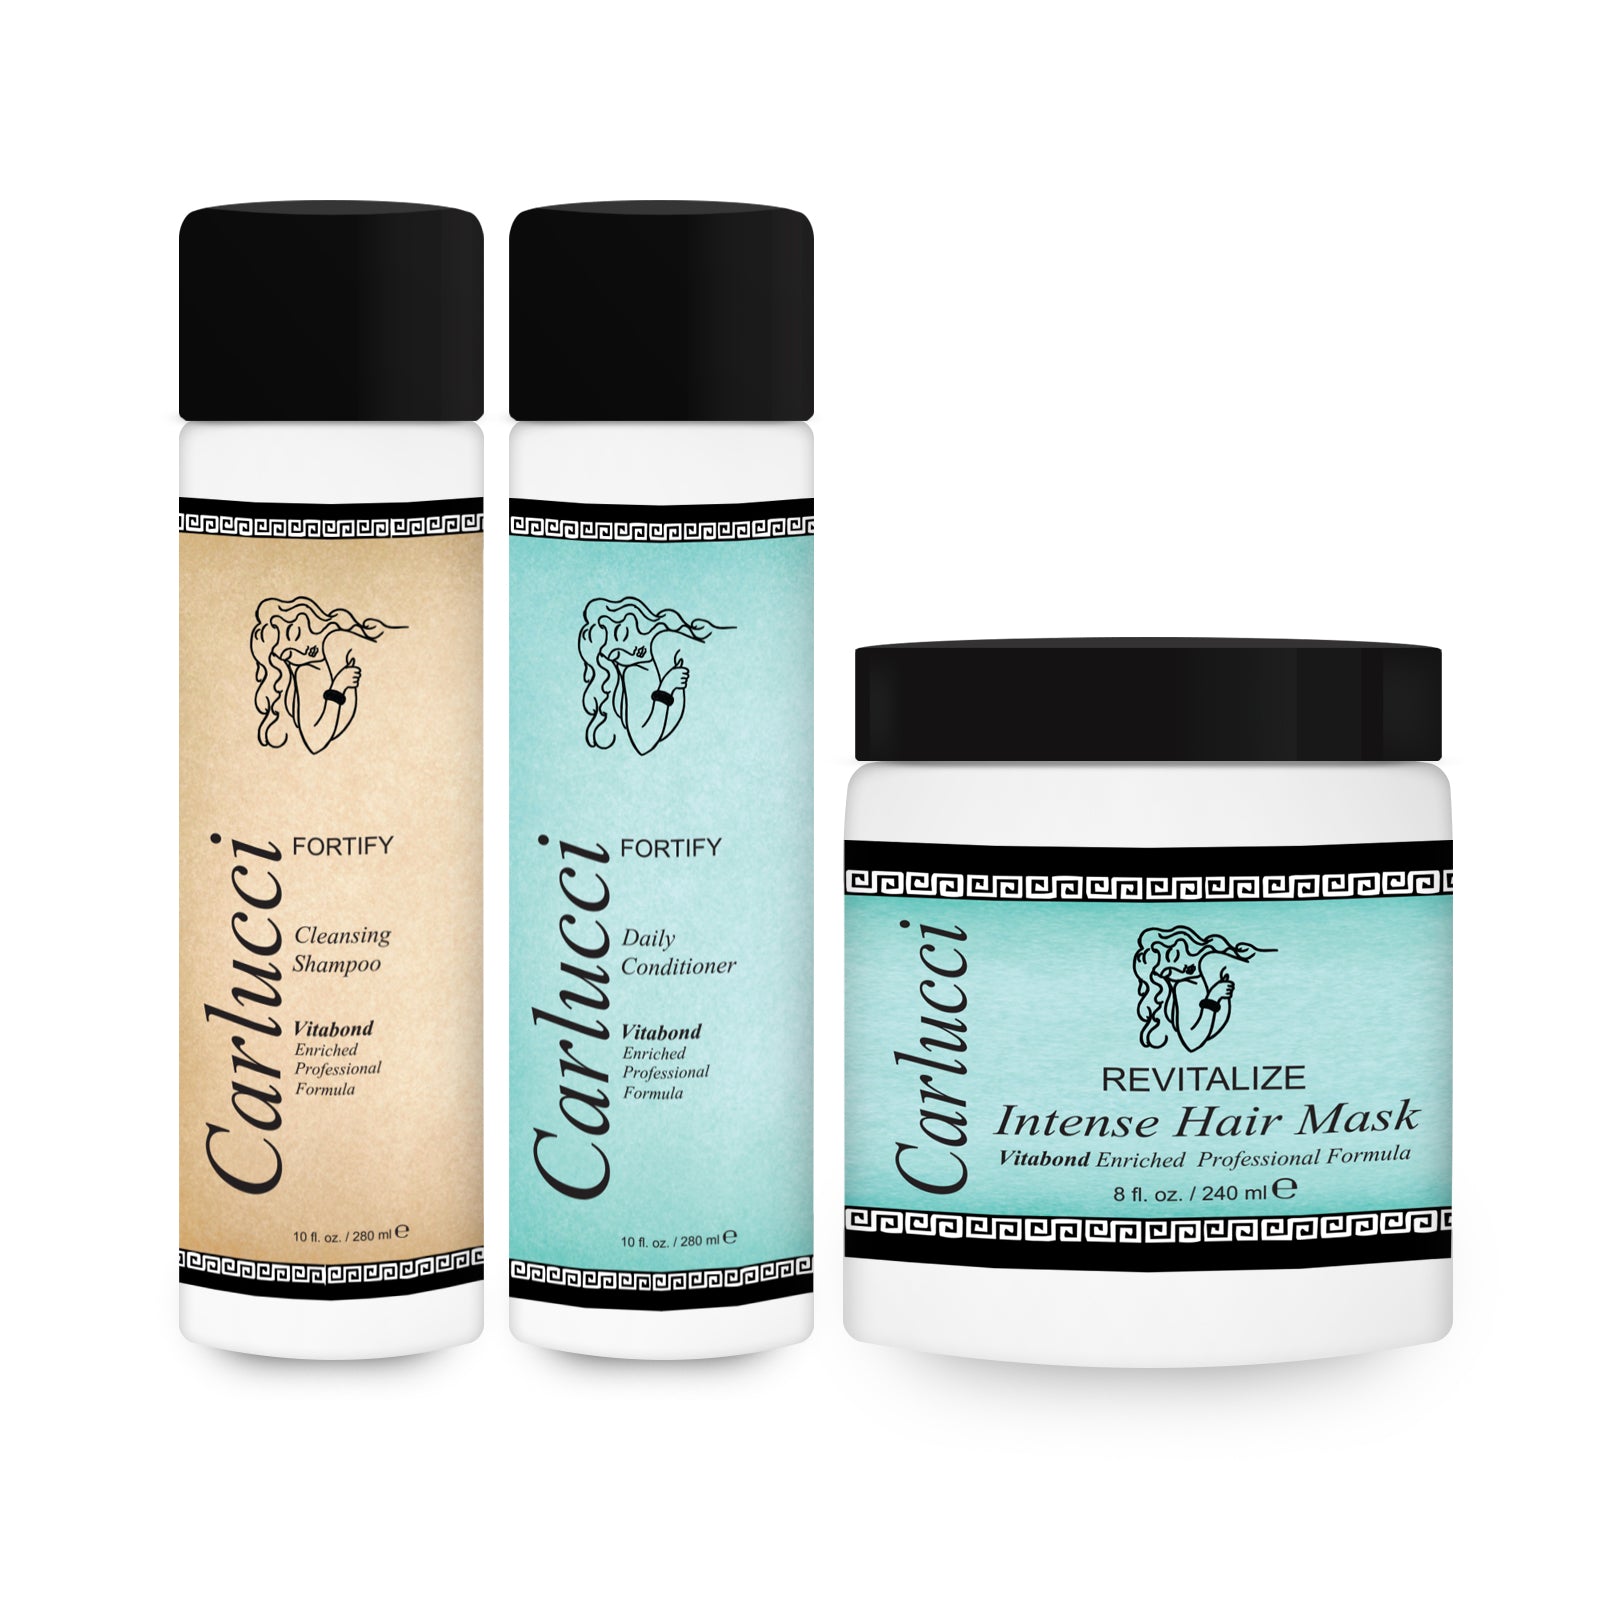 Fortify and Revitalize Shampoo, Conditioner and Mask Bundle